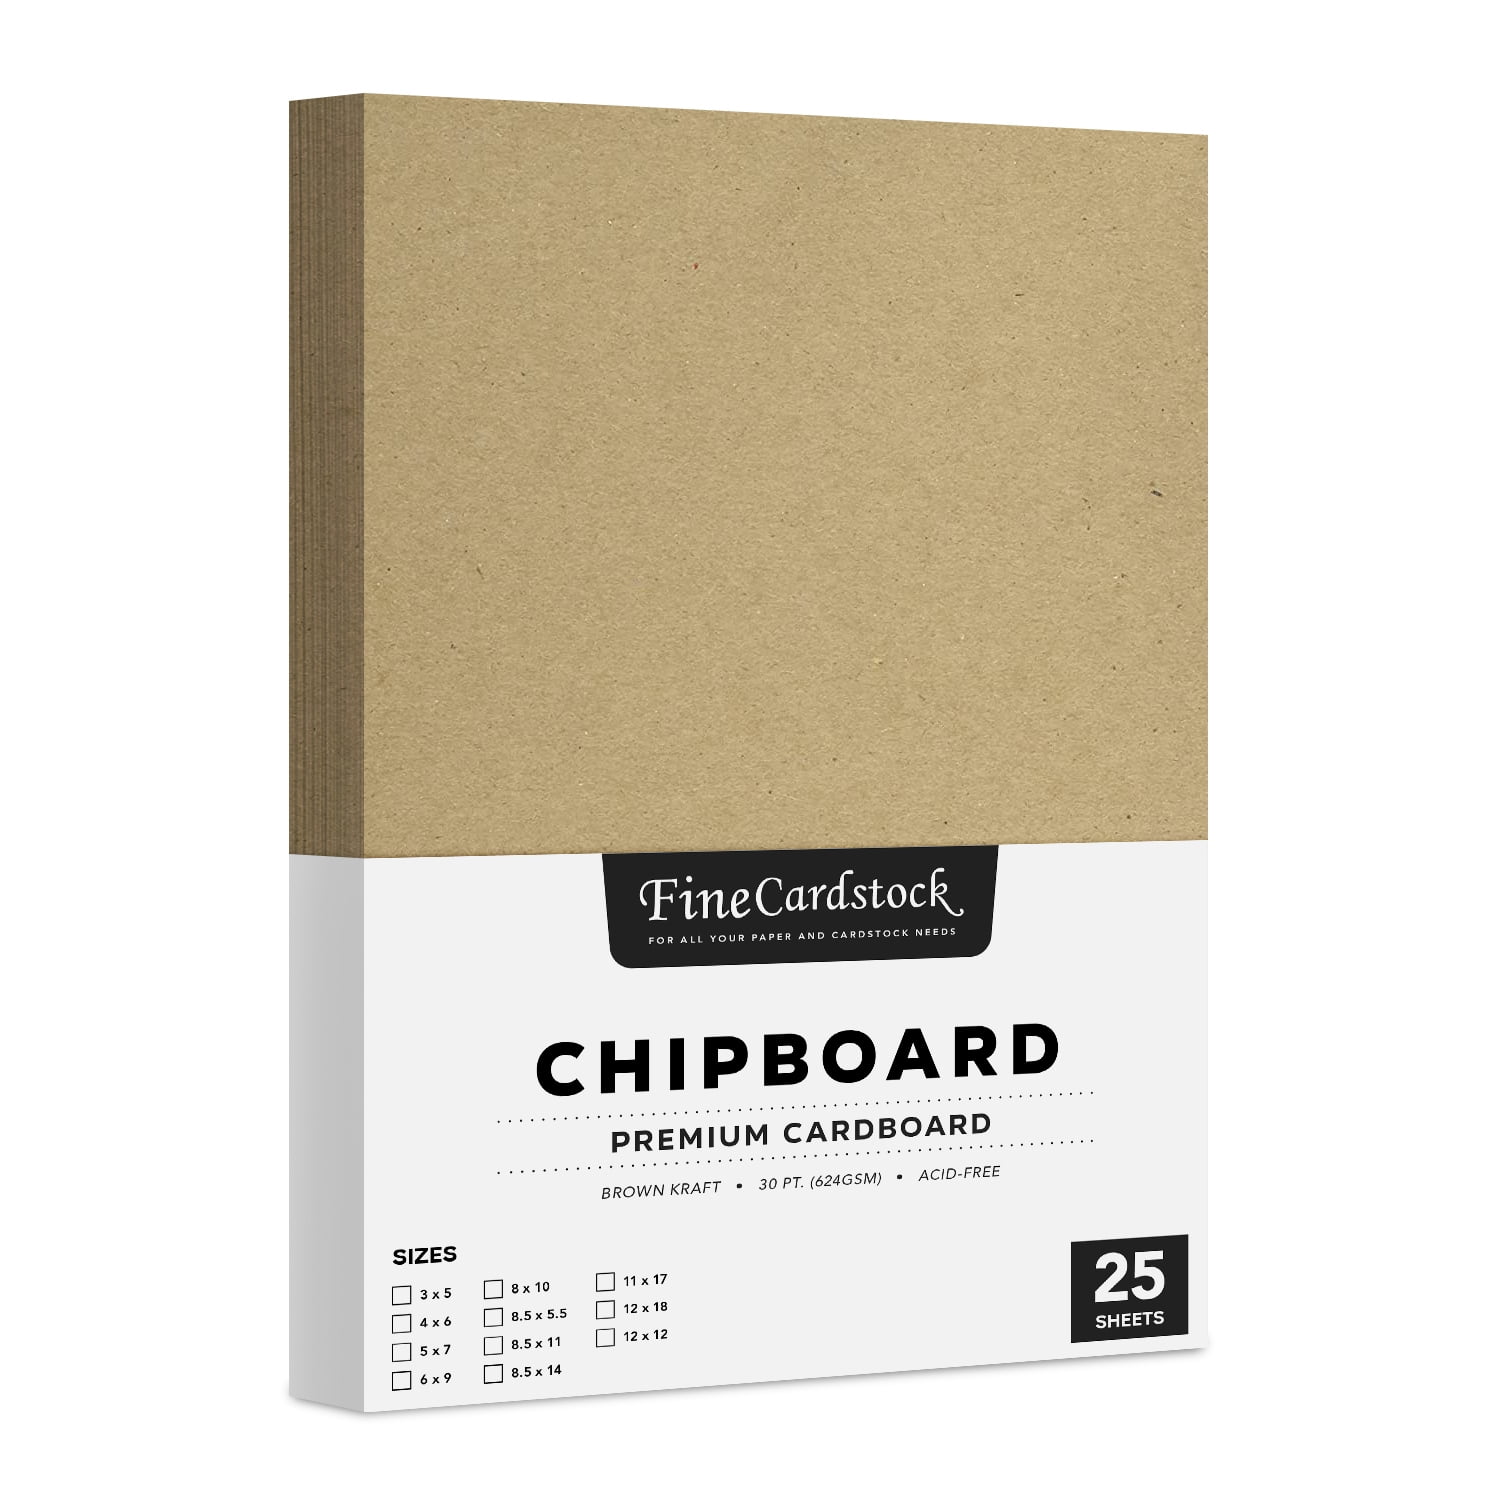 50 Sheets Chipboard 12 x 12 inch - 22pt (point) Light Weight Brown